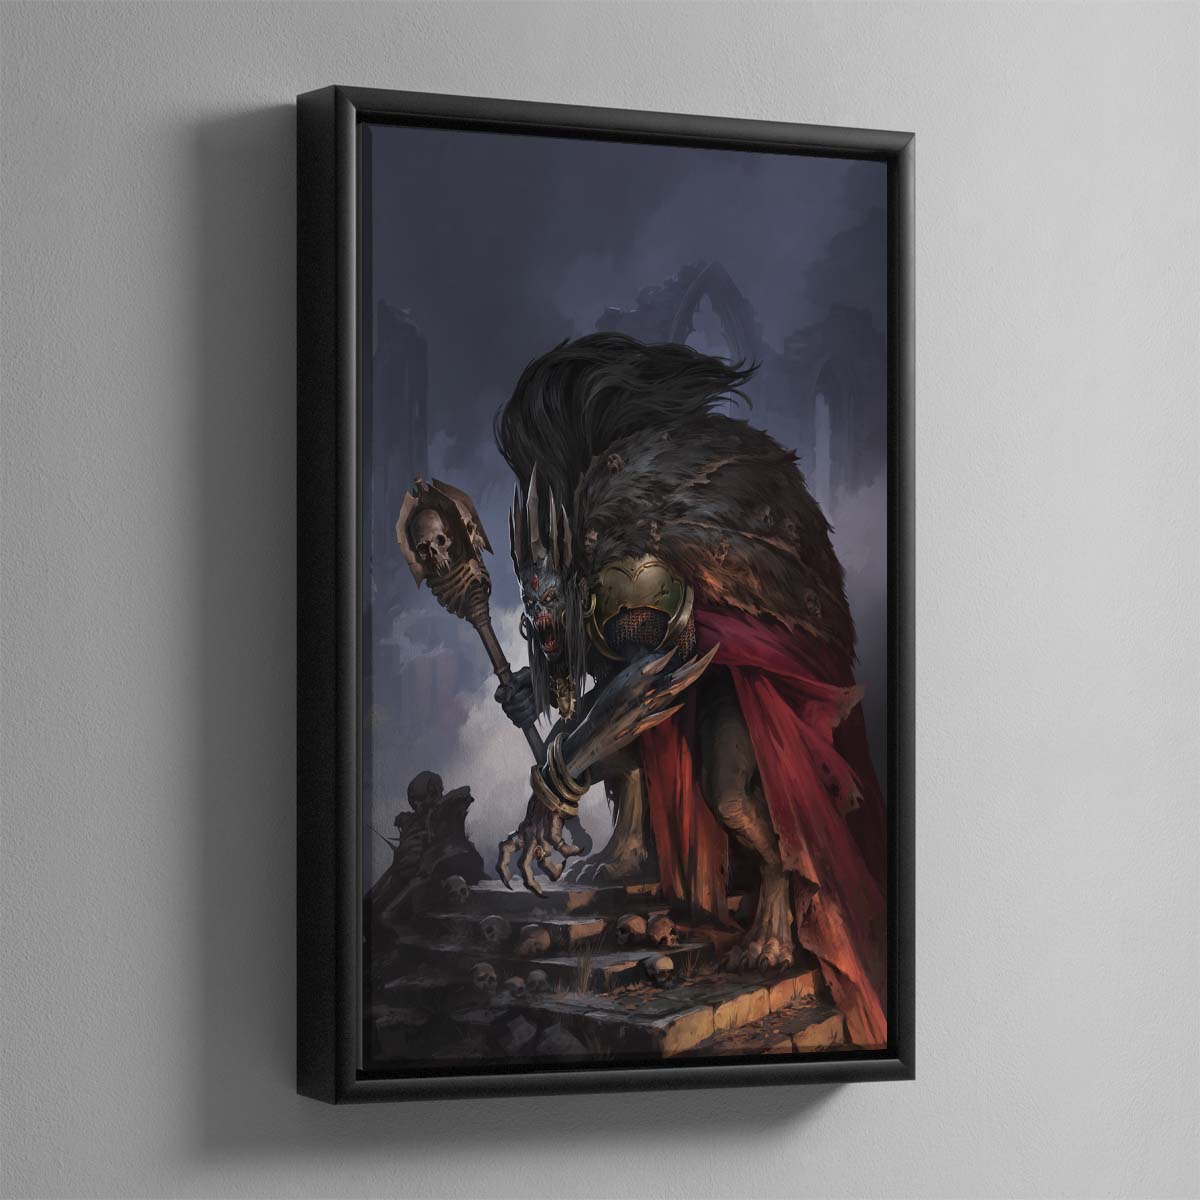 Ushoran, the Mad King – Framed Canvas